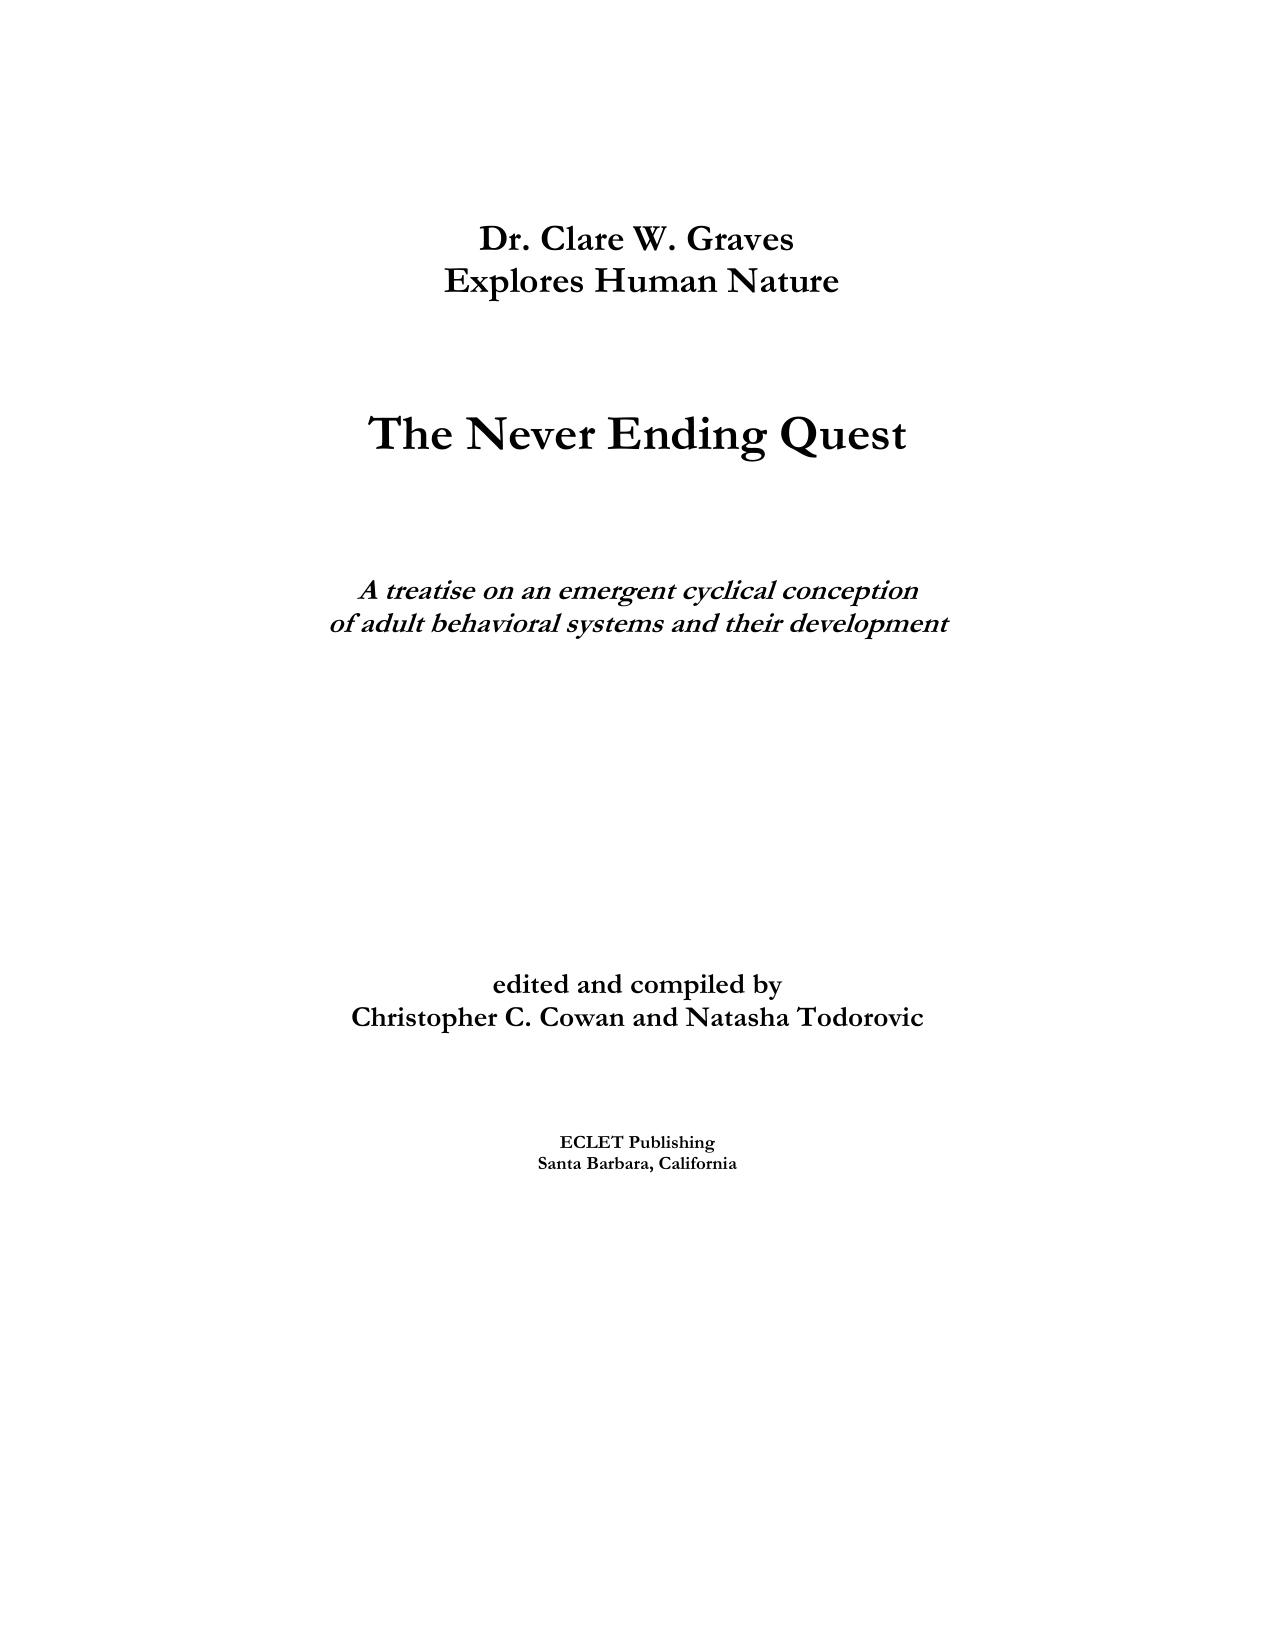 The Never Ending Quest: Clare W. Graves Explores Human Nature